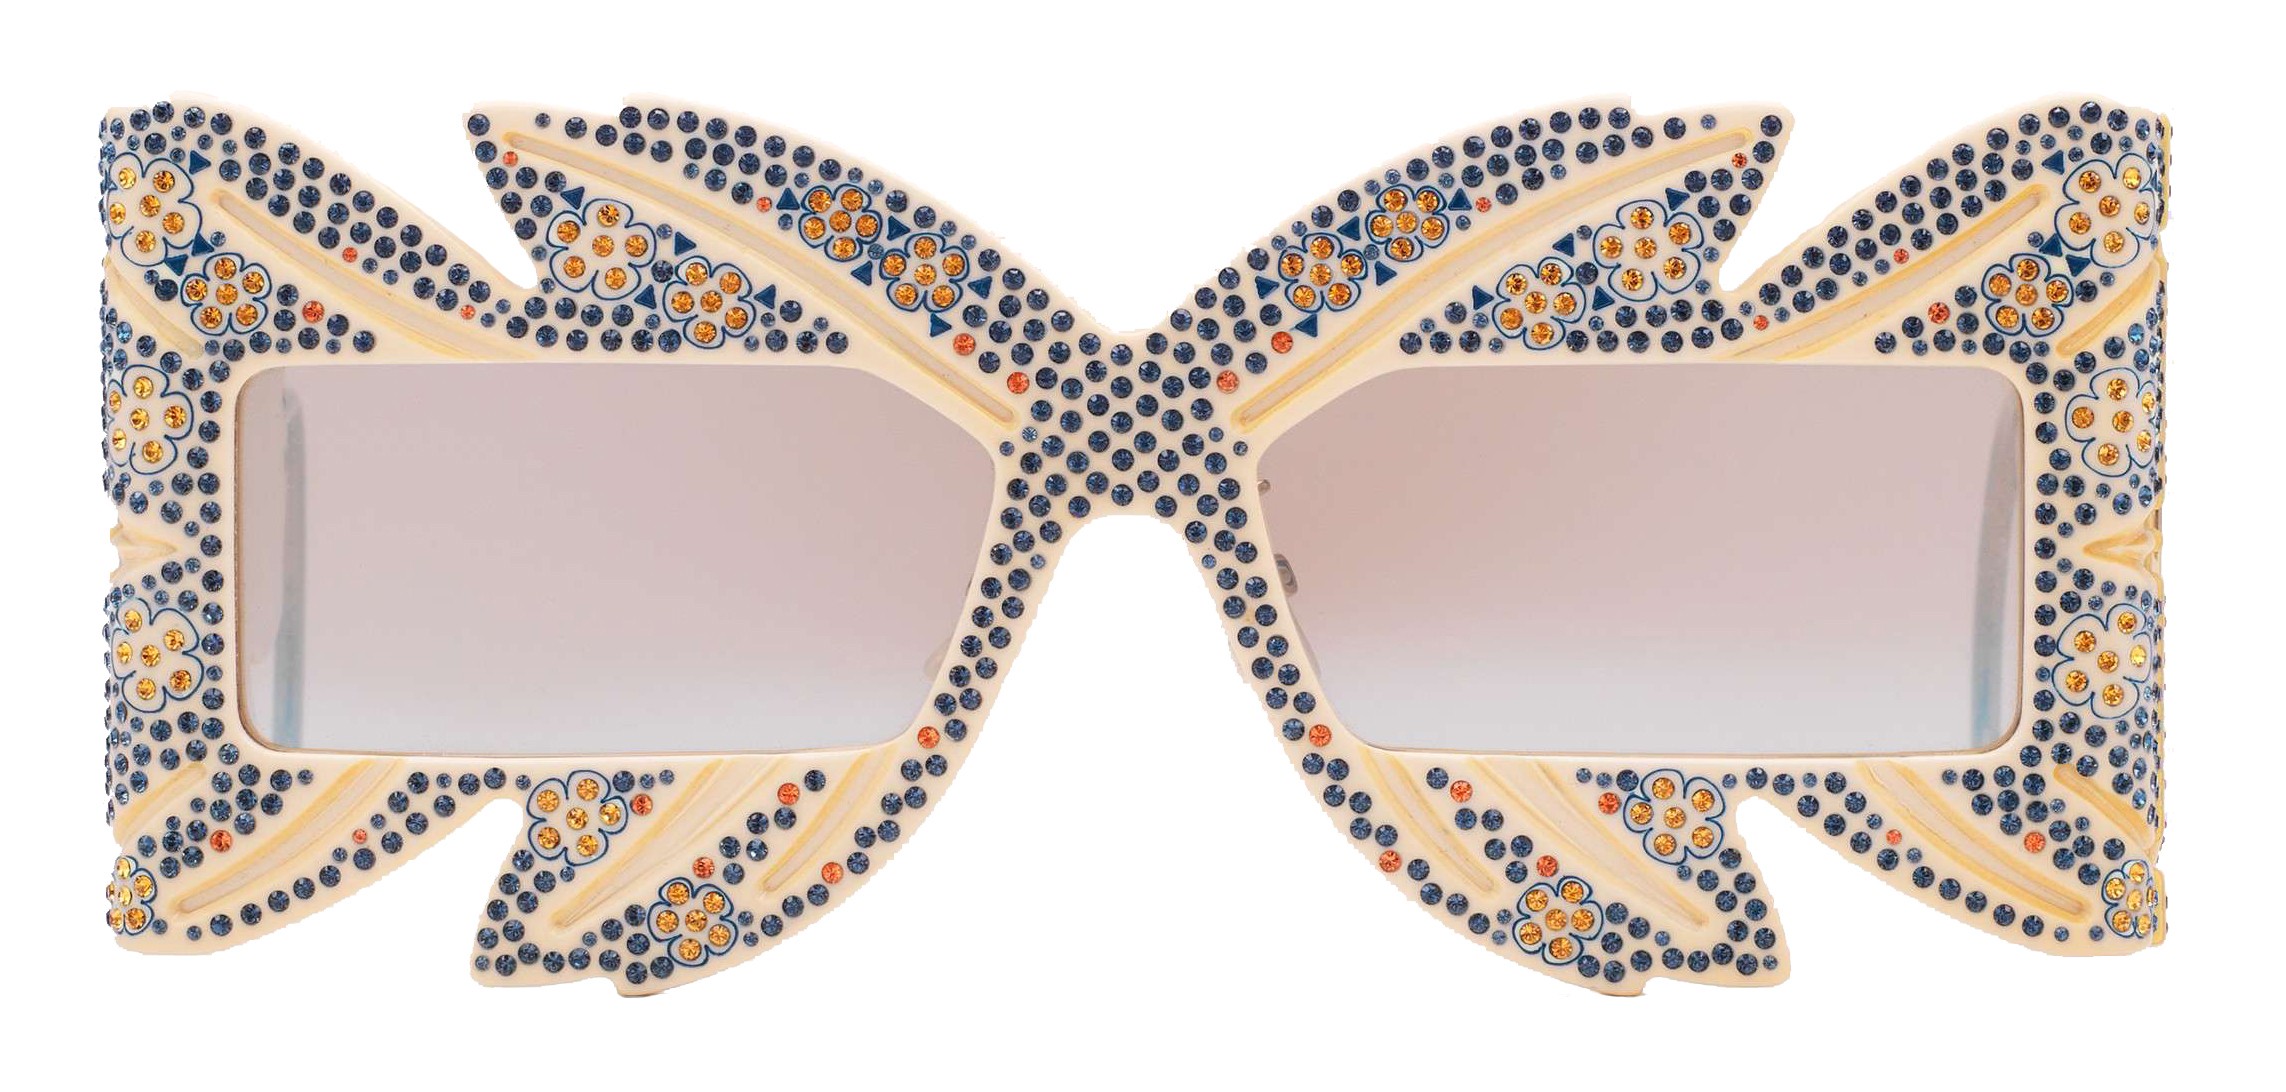 Gucci - Sunglasses with Mask with Swarovski Crystals Limited Edition -  Rétro Details - Gucci Eyewear - Avvenice